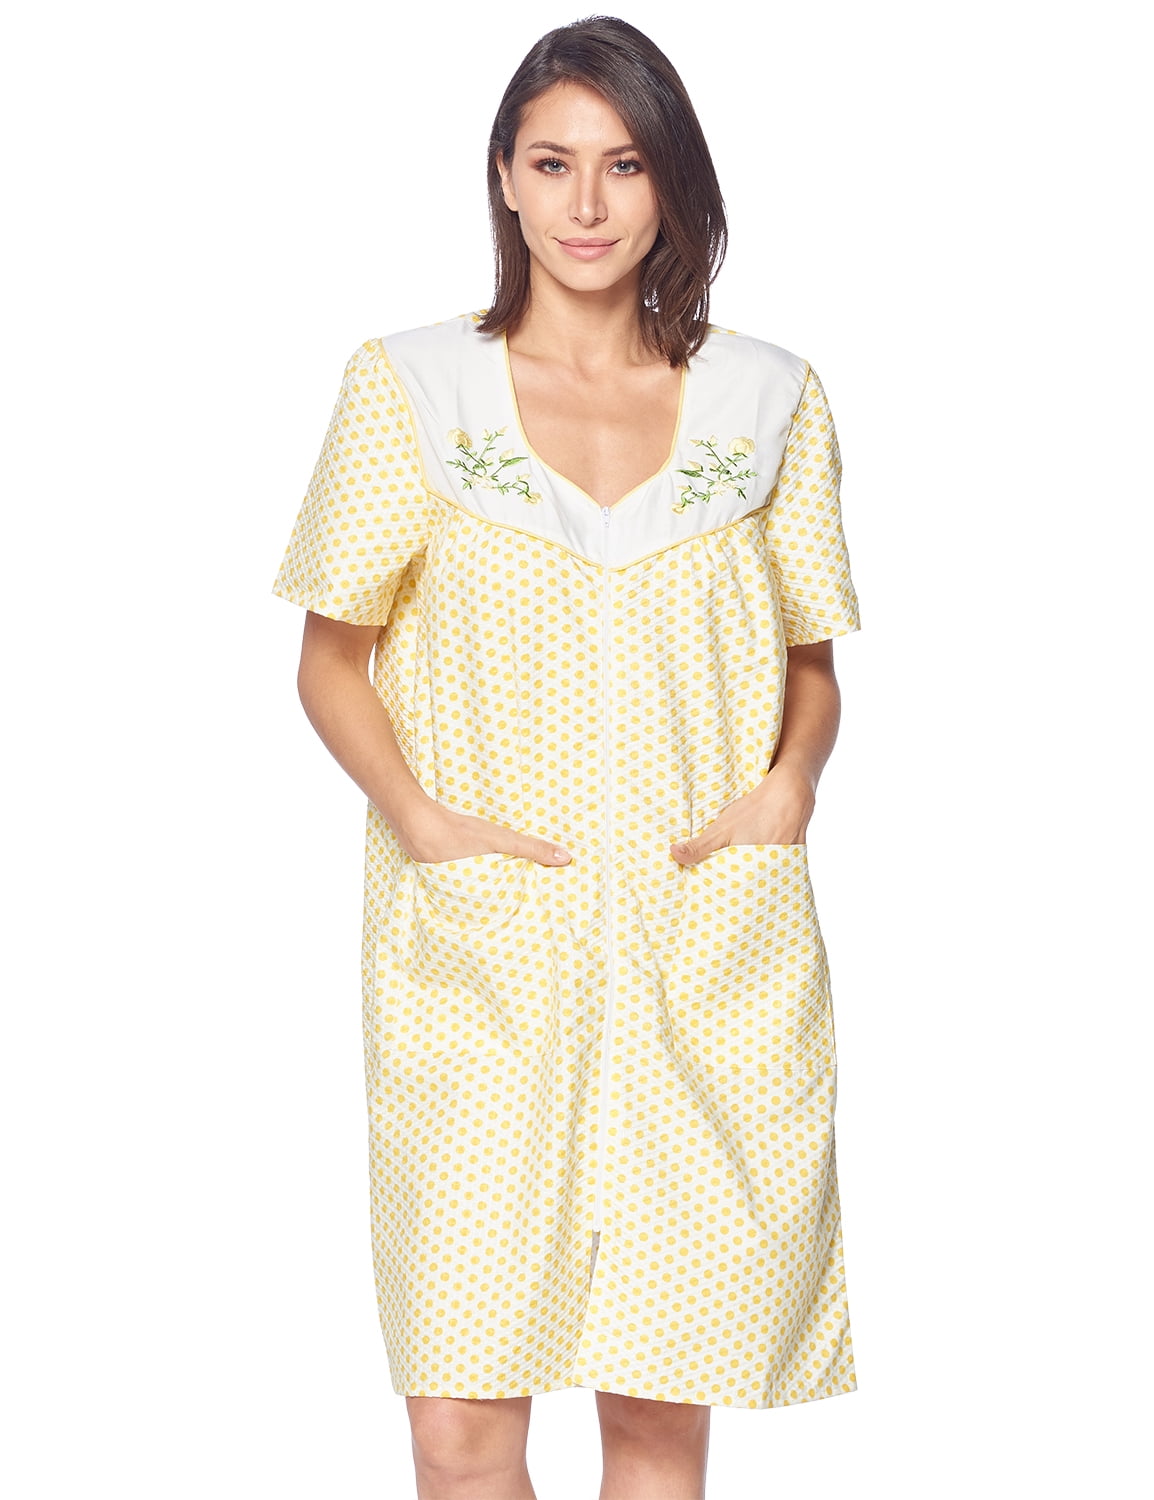 New Adult Seersucker Embroidered "BabyDoll" Style Yellow & White Dress 